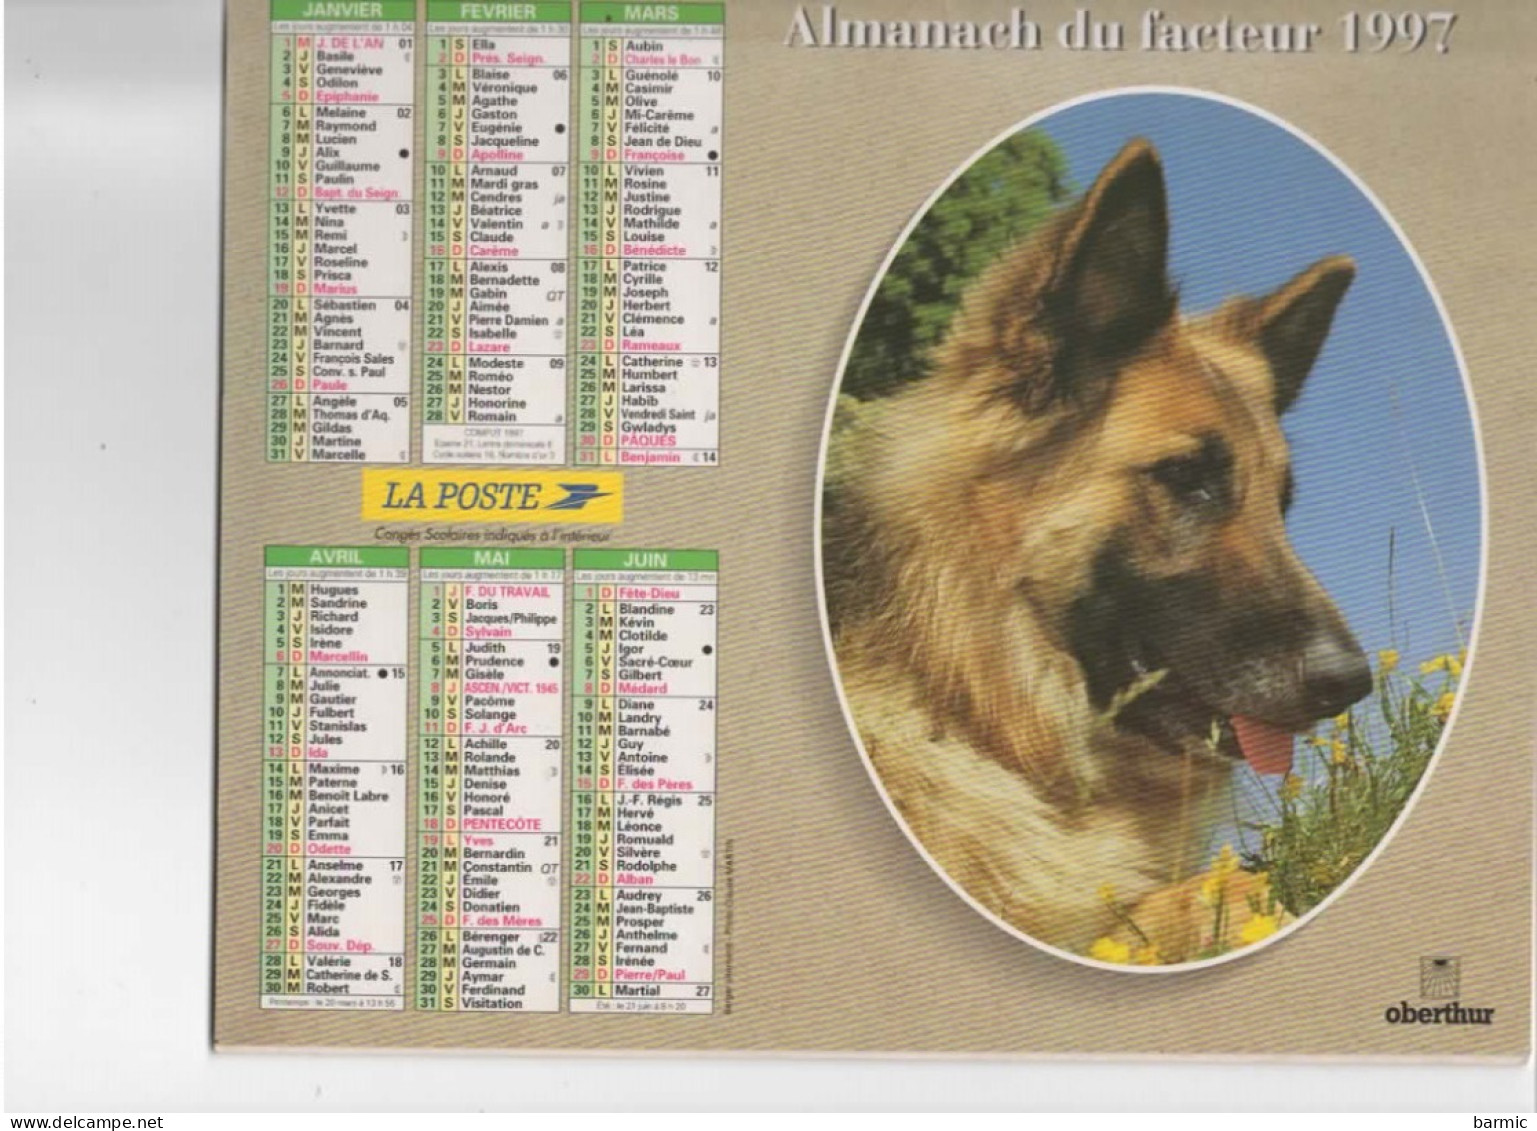 CALENDRIER ANNEE 1997, COMPLET, BERGER ALLEMAND, CHEVAL REF 13765 - Grossformat : 1991-00